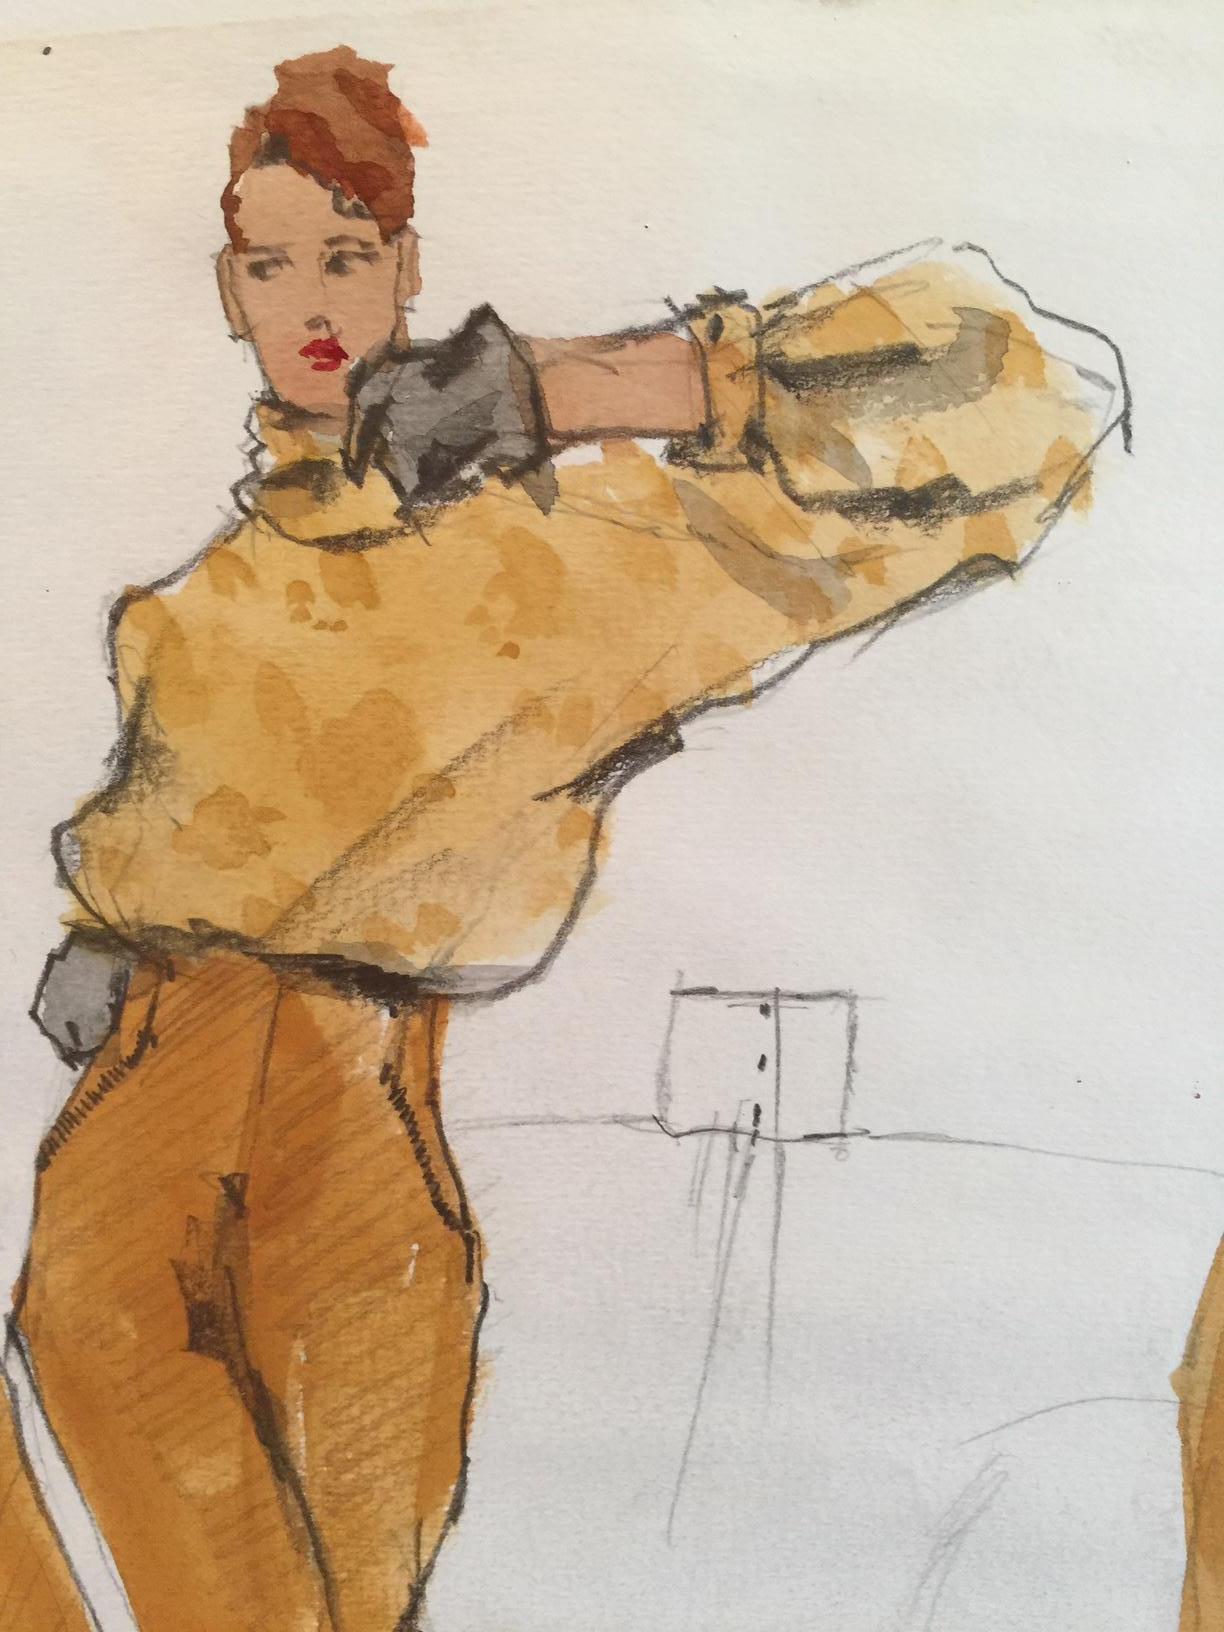 Rare Original Fashion Sketch With Production Notes - Realist Painting by Gordon Henderson